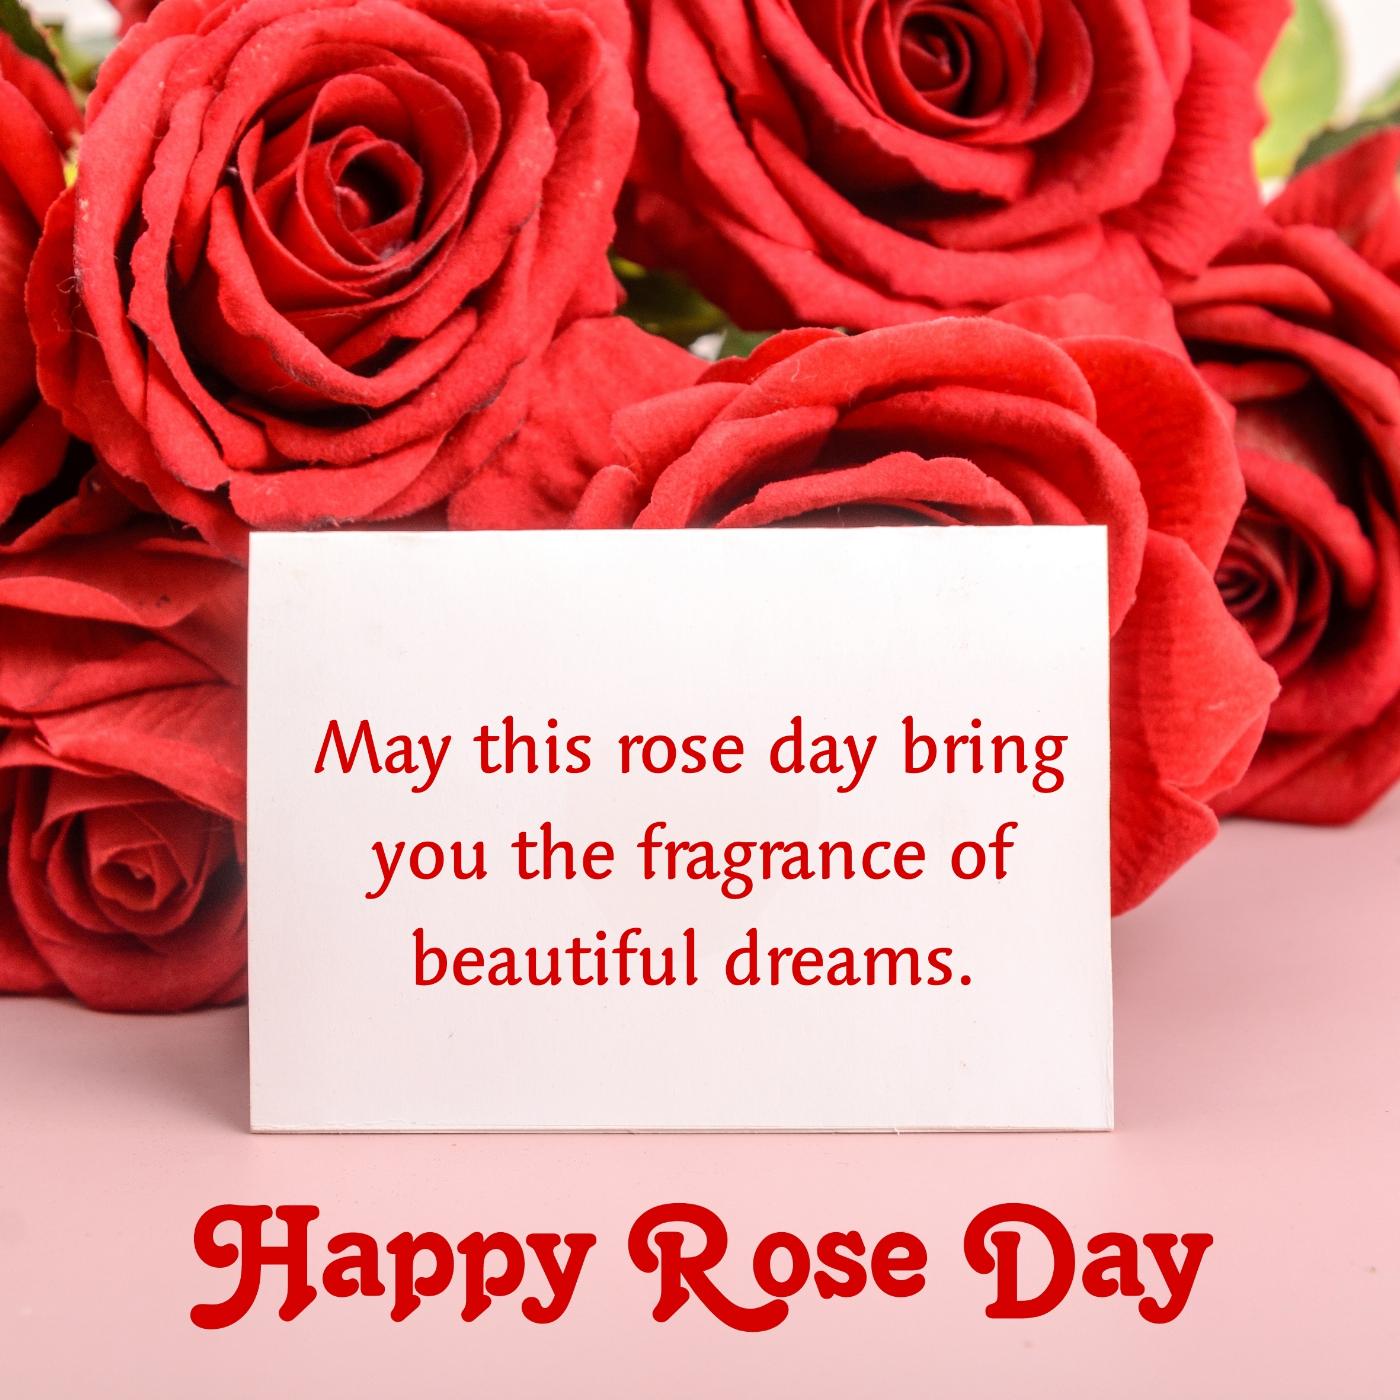 May this rose day bring you the fragrance of beautiful dreams